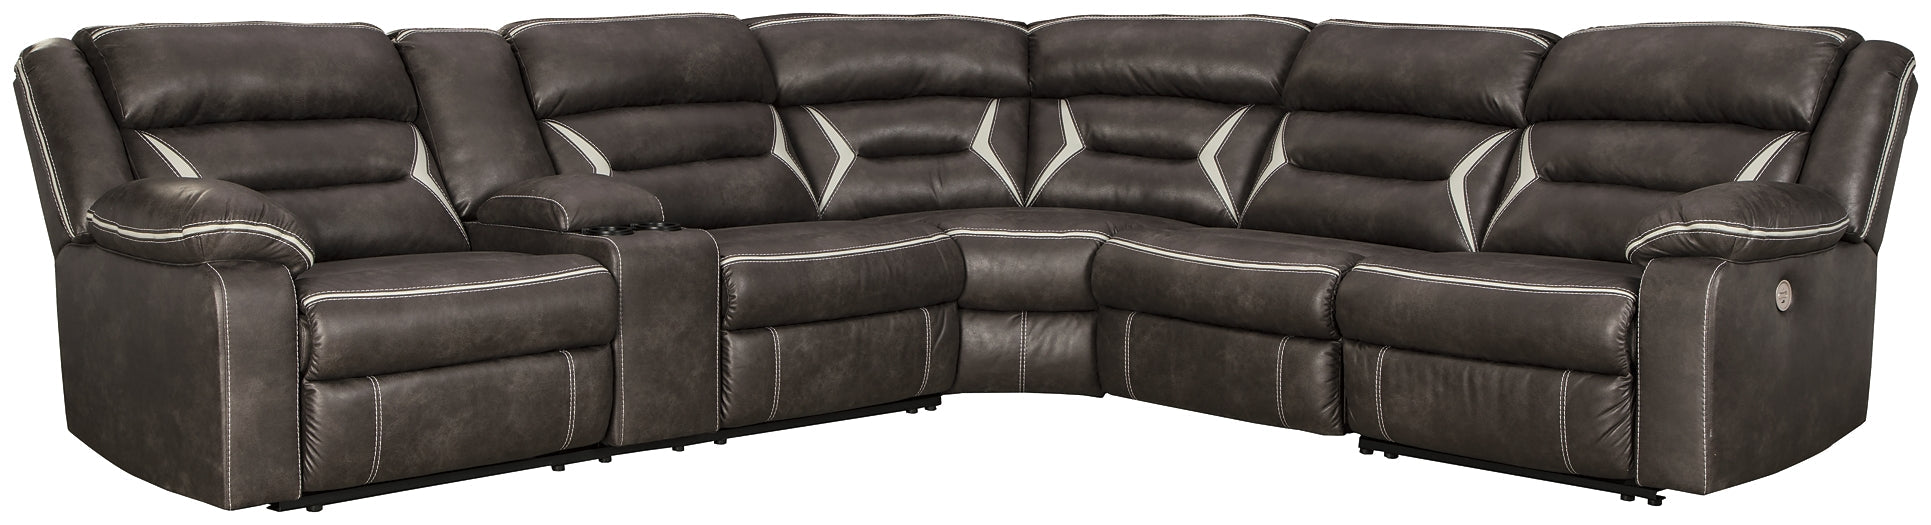 Kincord 4-Piece Sectional with Recliner Smyrna Furniture Outlet